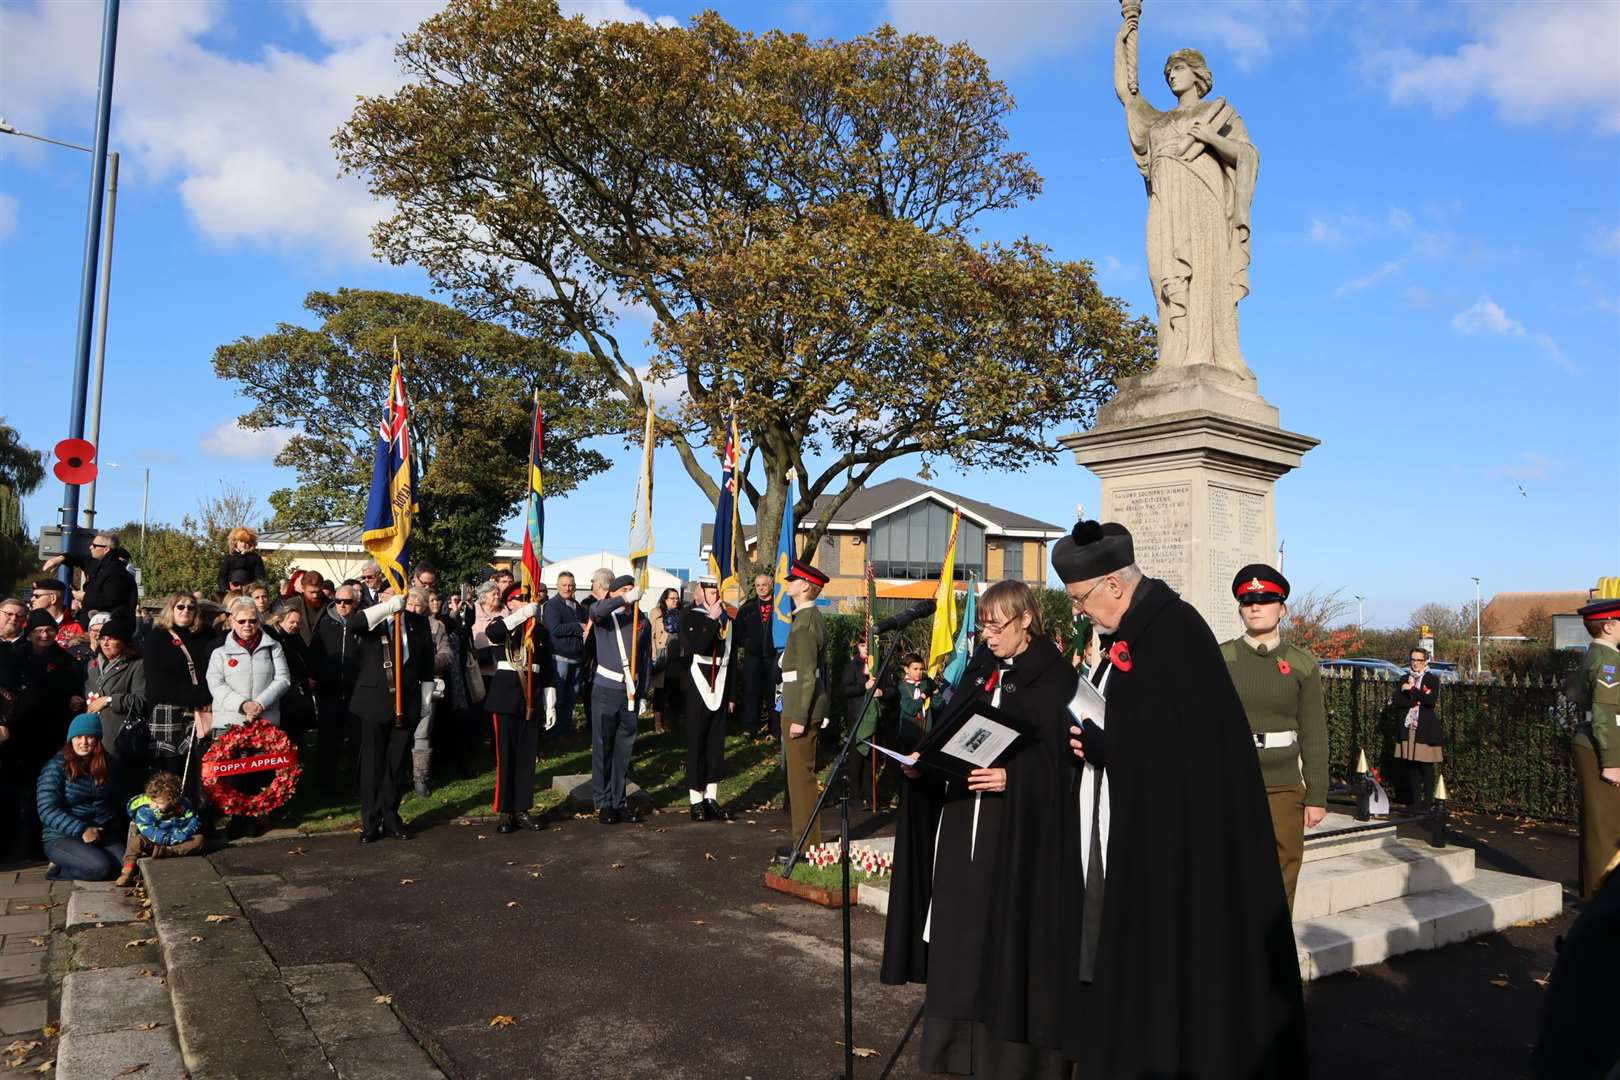 The Remembrance Sunday memorial service at Sheerness (21306166)